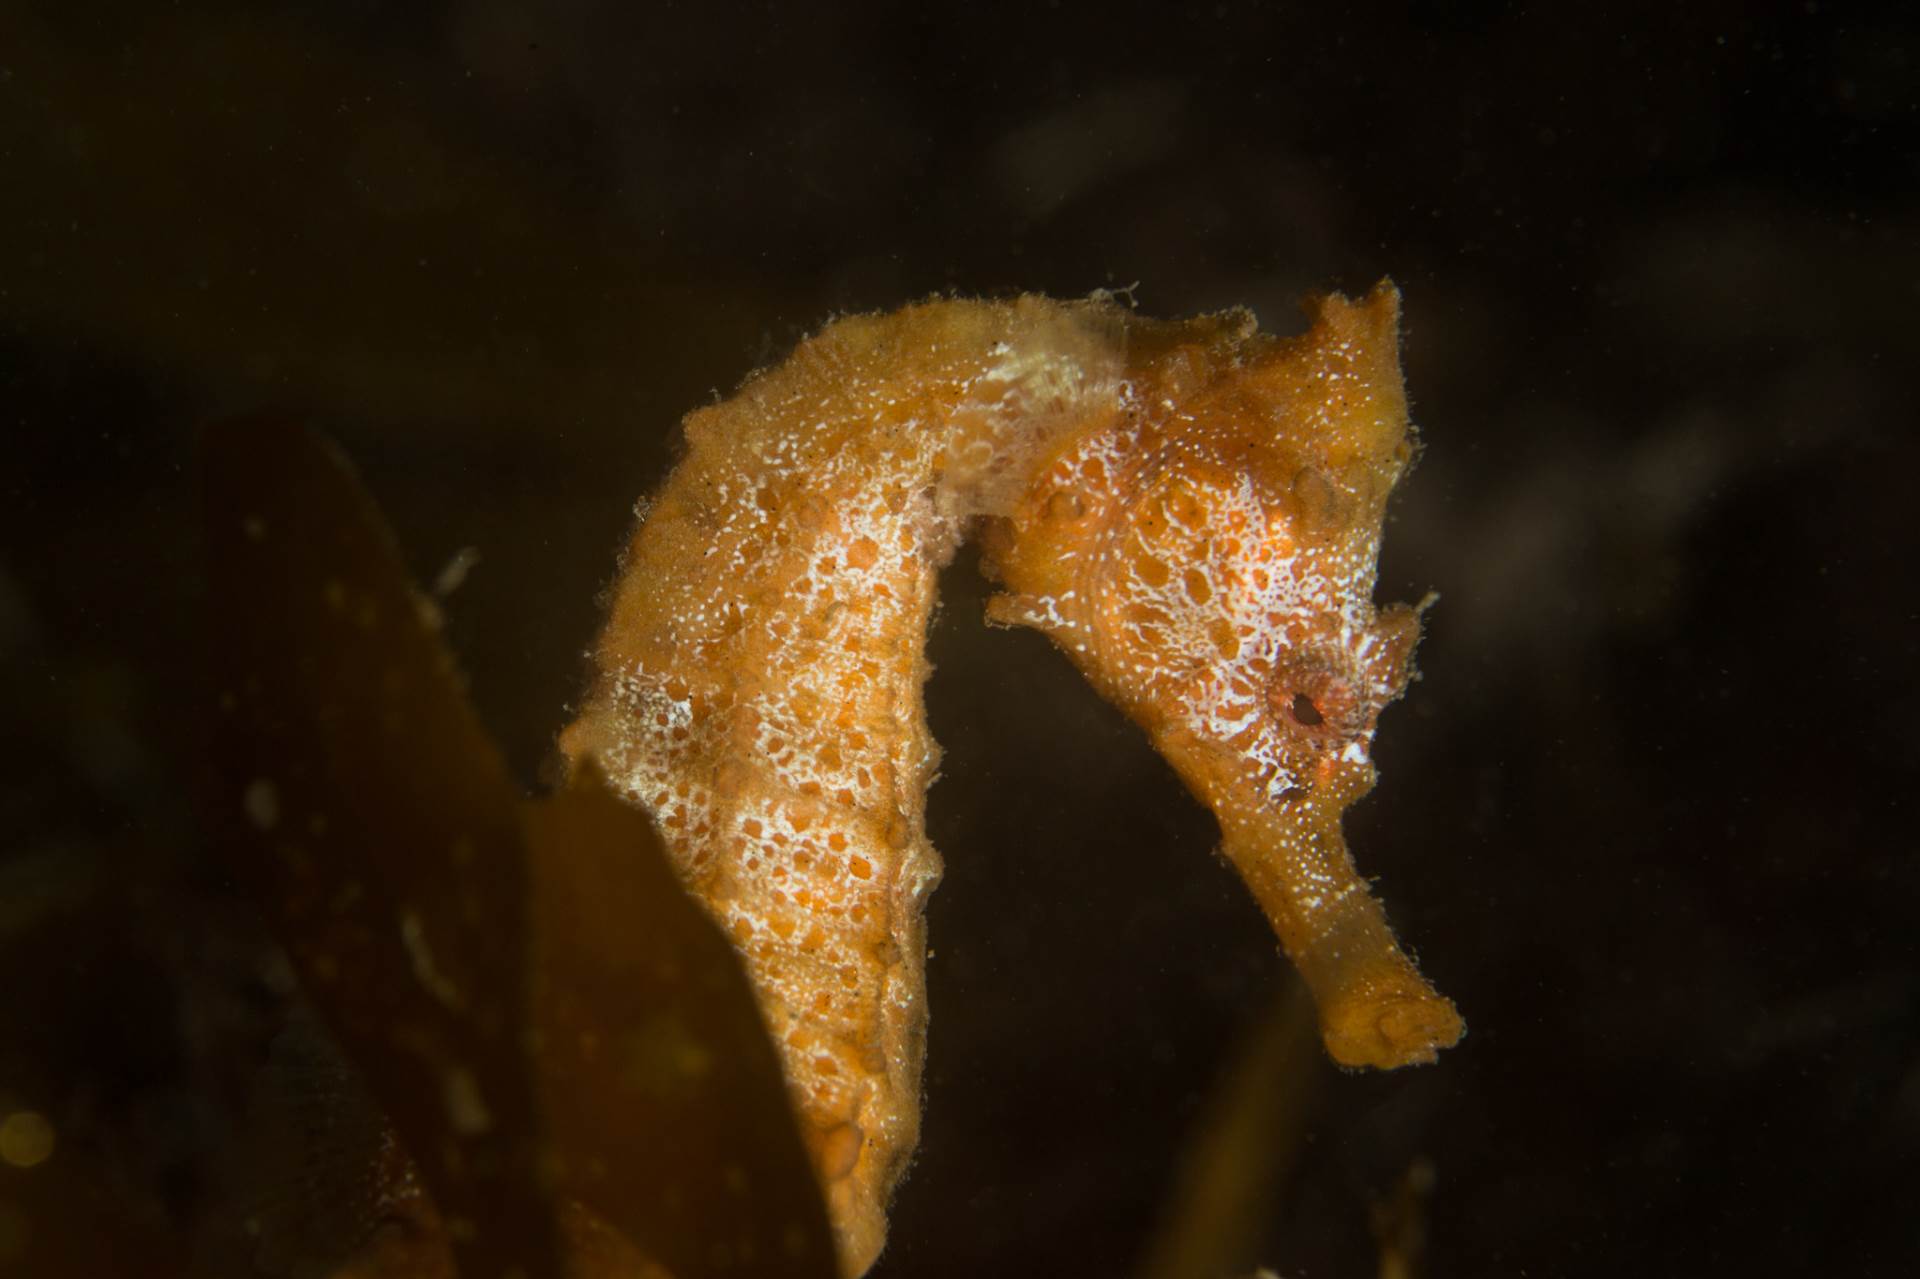 Pacific Seahorse are one of the largest in the world and can be up to 12 inches long!